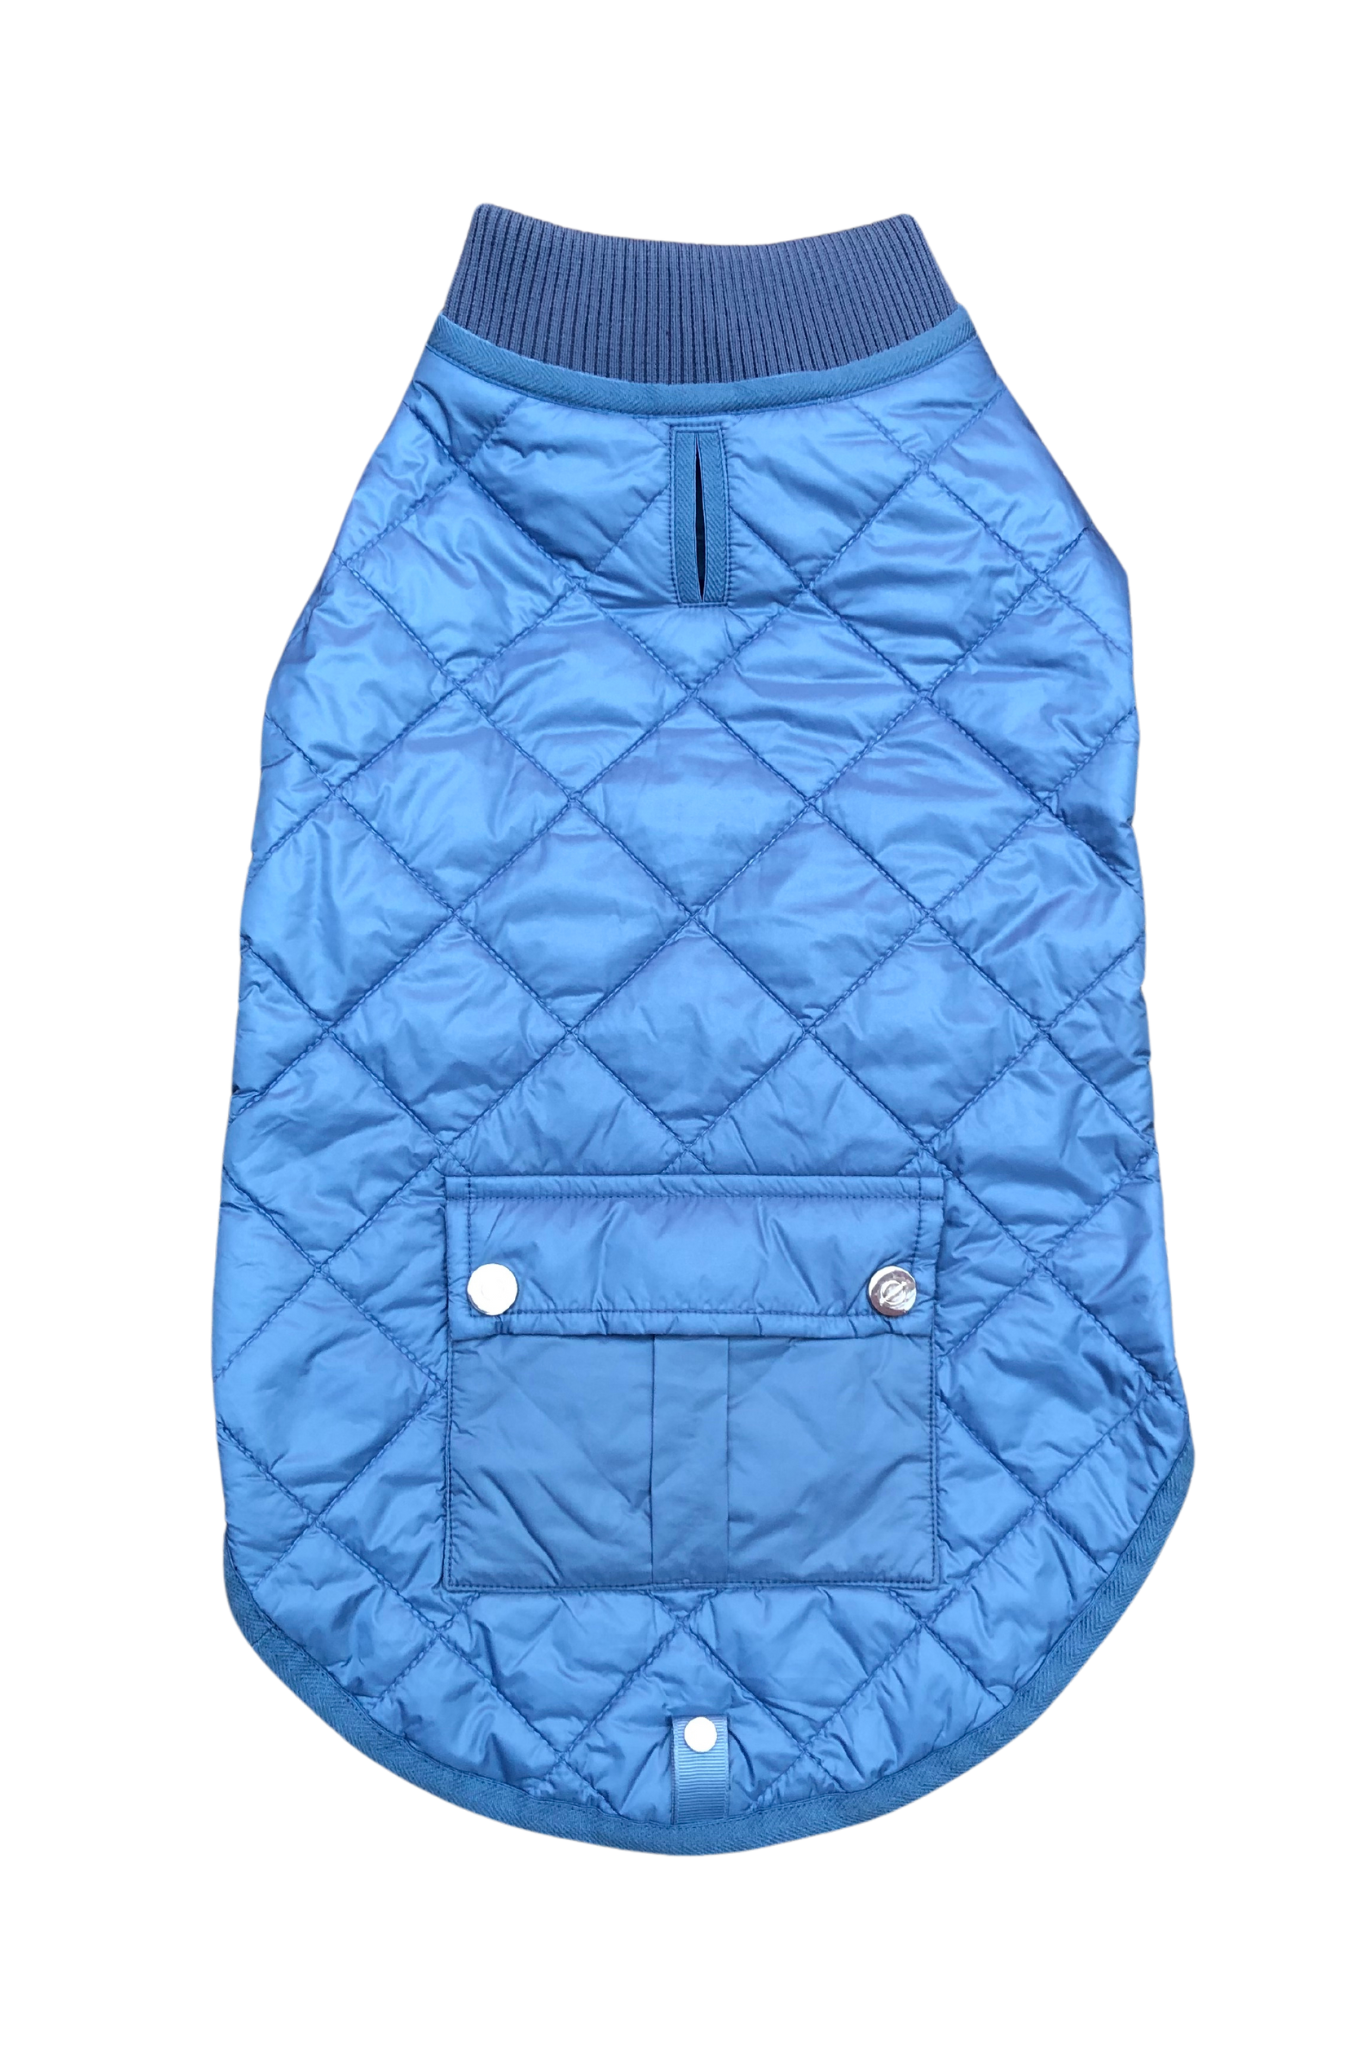 Romeo quilted dog coat